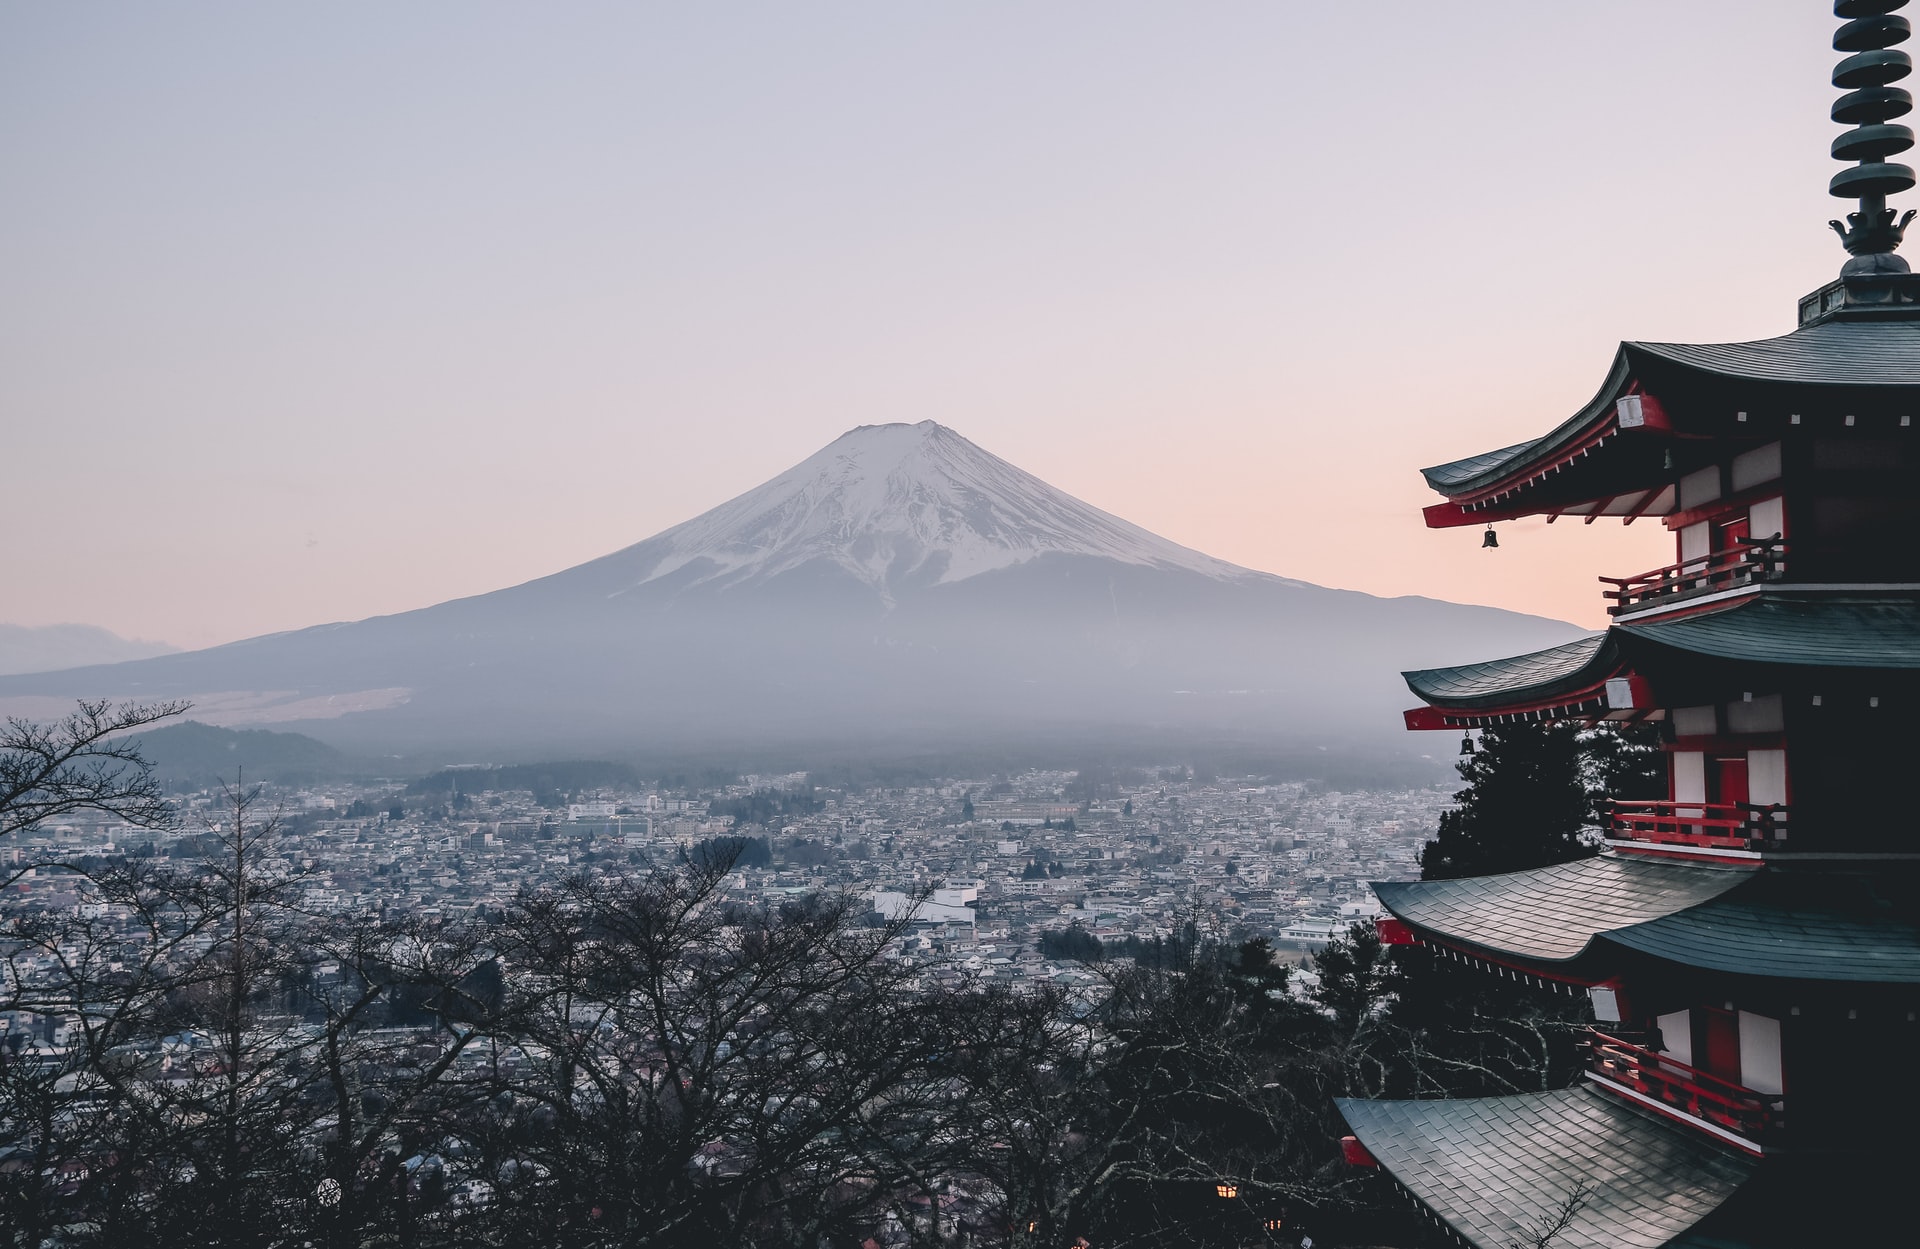 10 countries to solo travel to - Japan